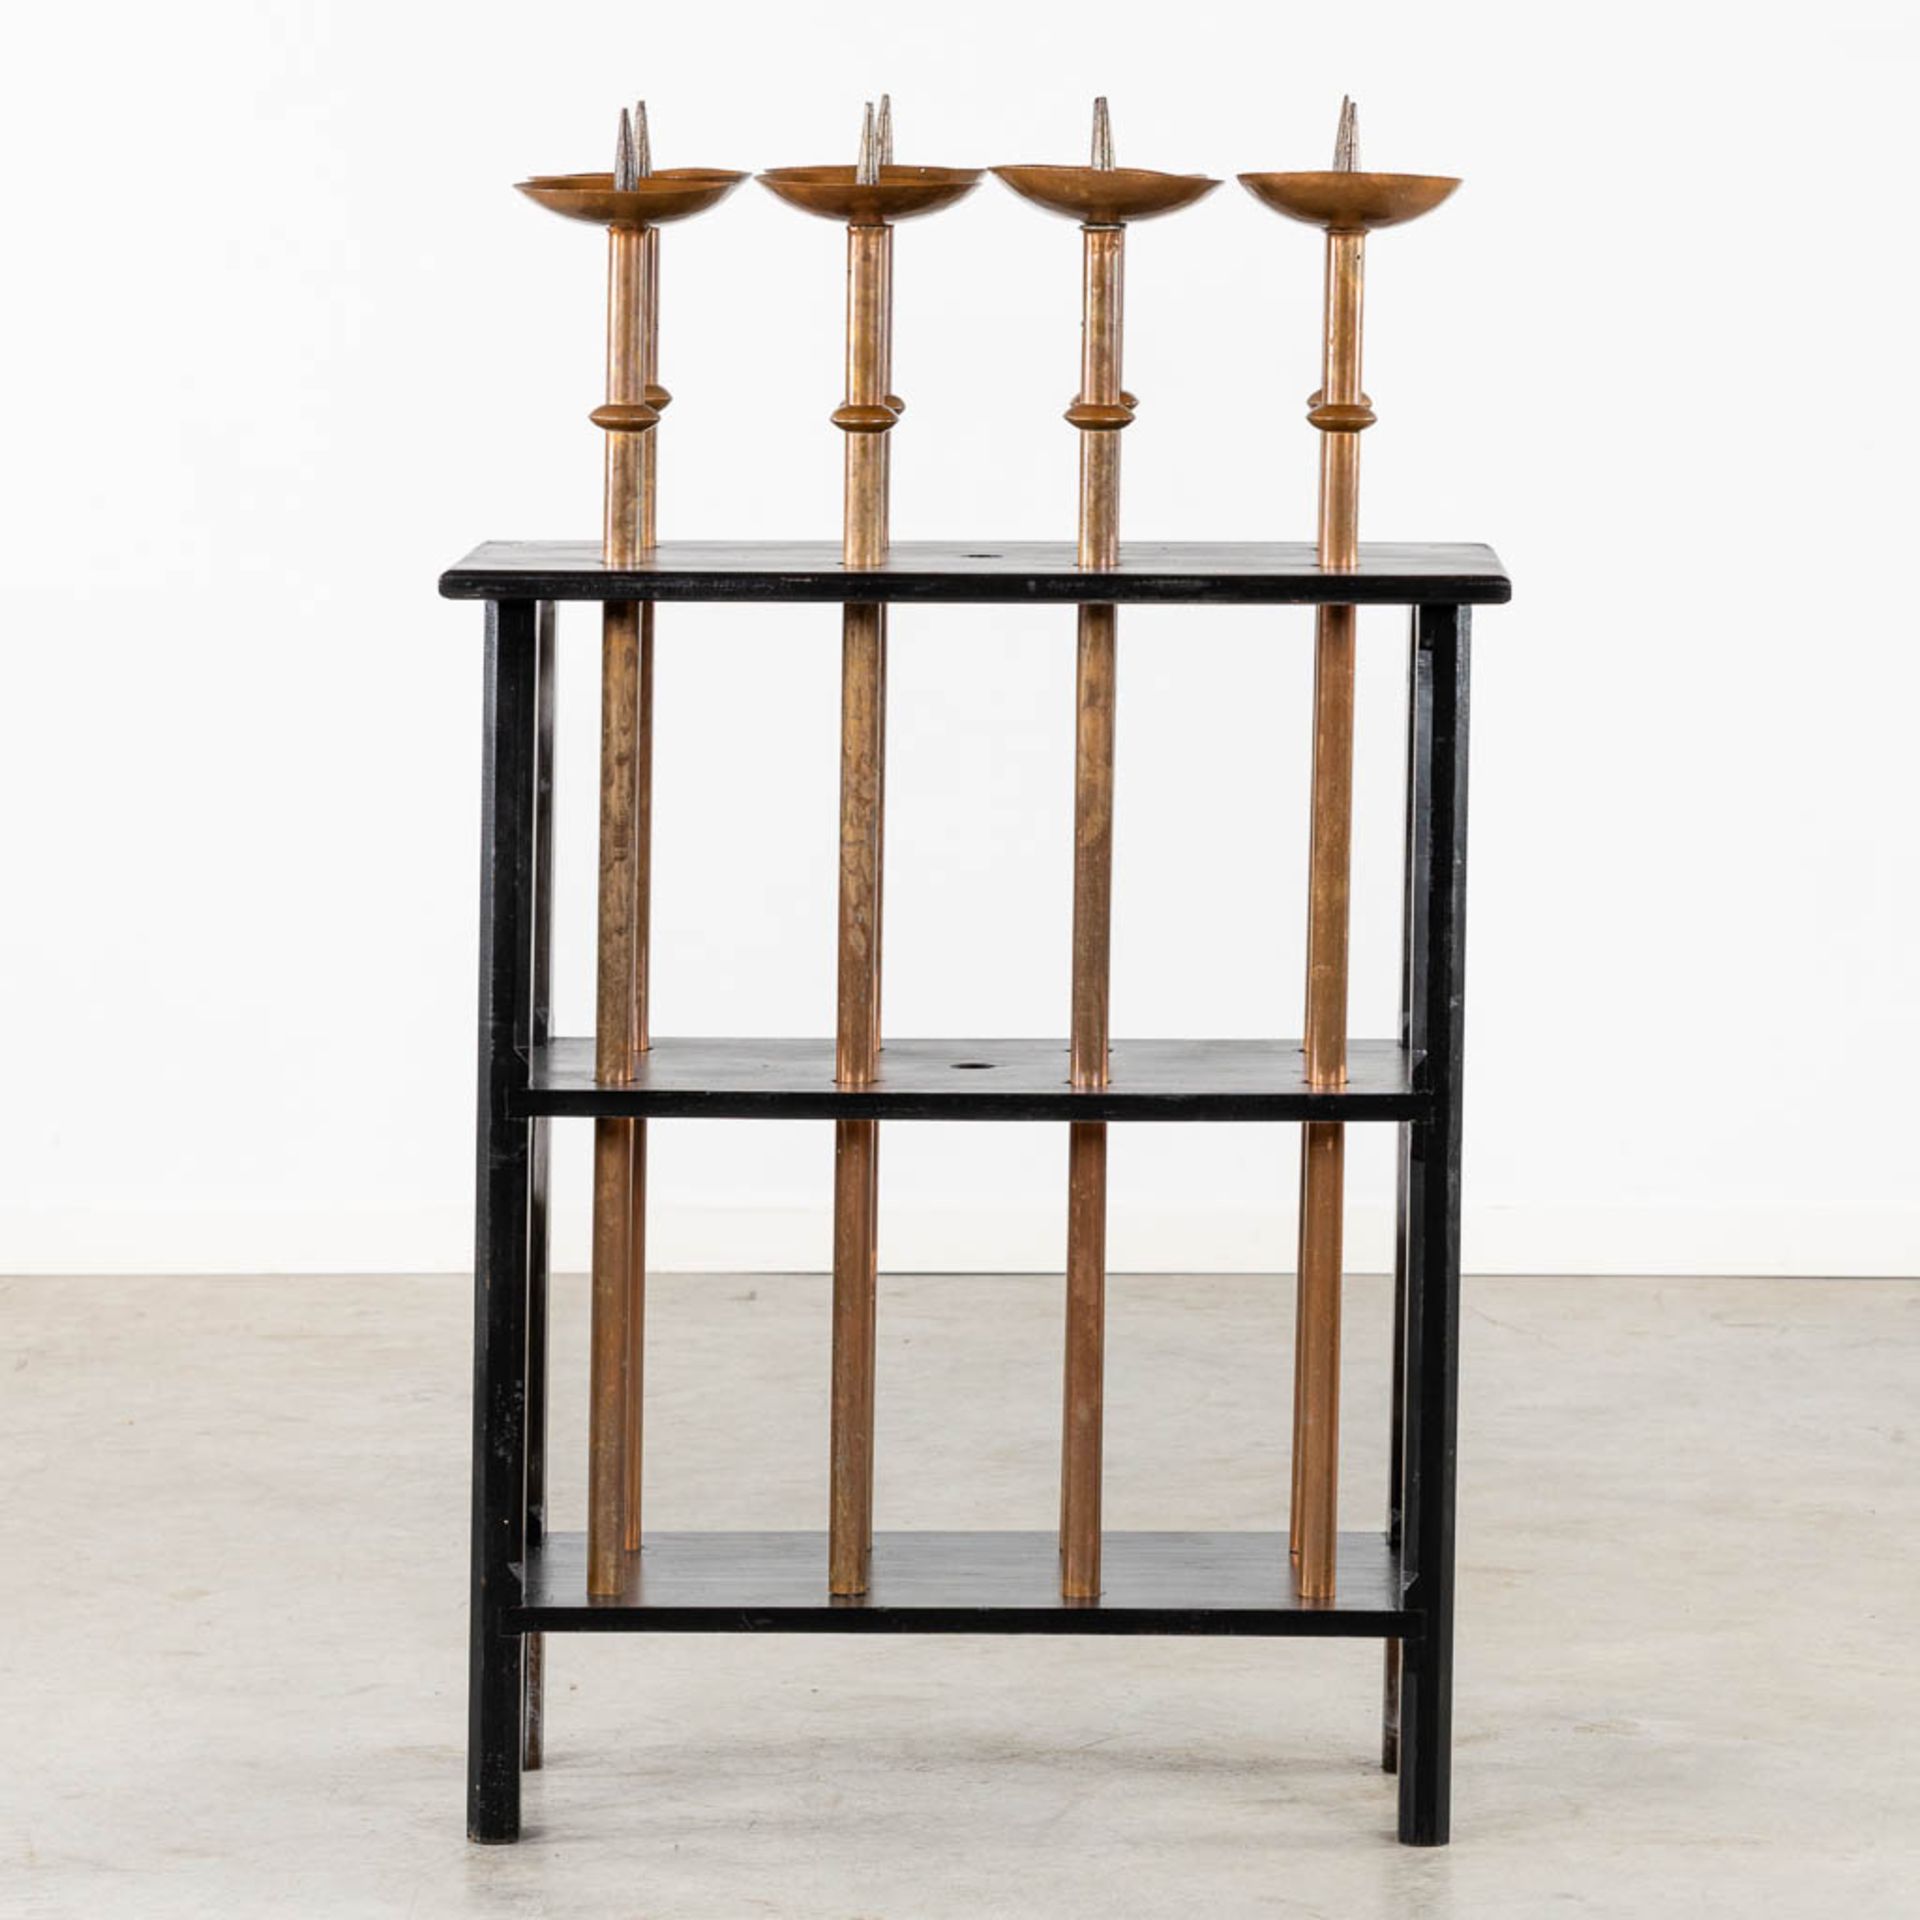 A set of 8 processional candelabra in a wood stand. (L:36 x W:75 x H:124 cm) - Image 5 of 8